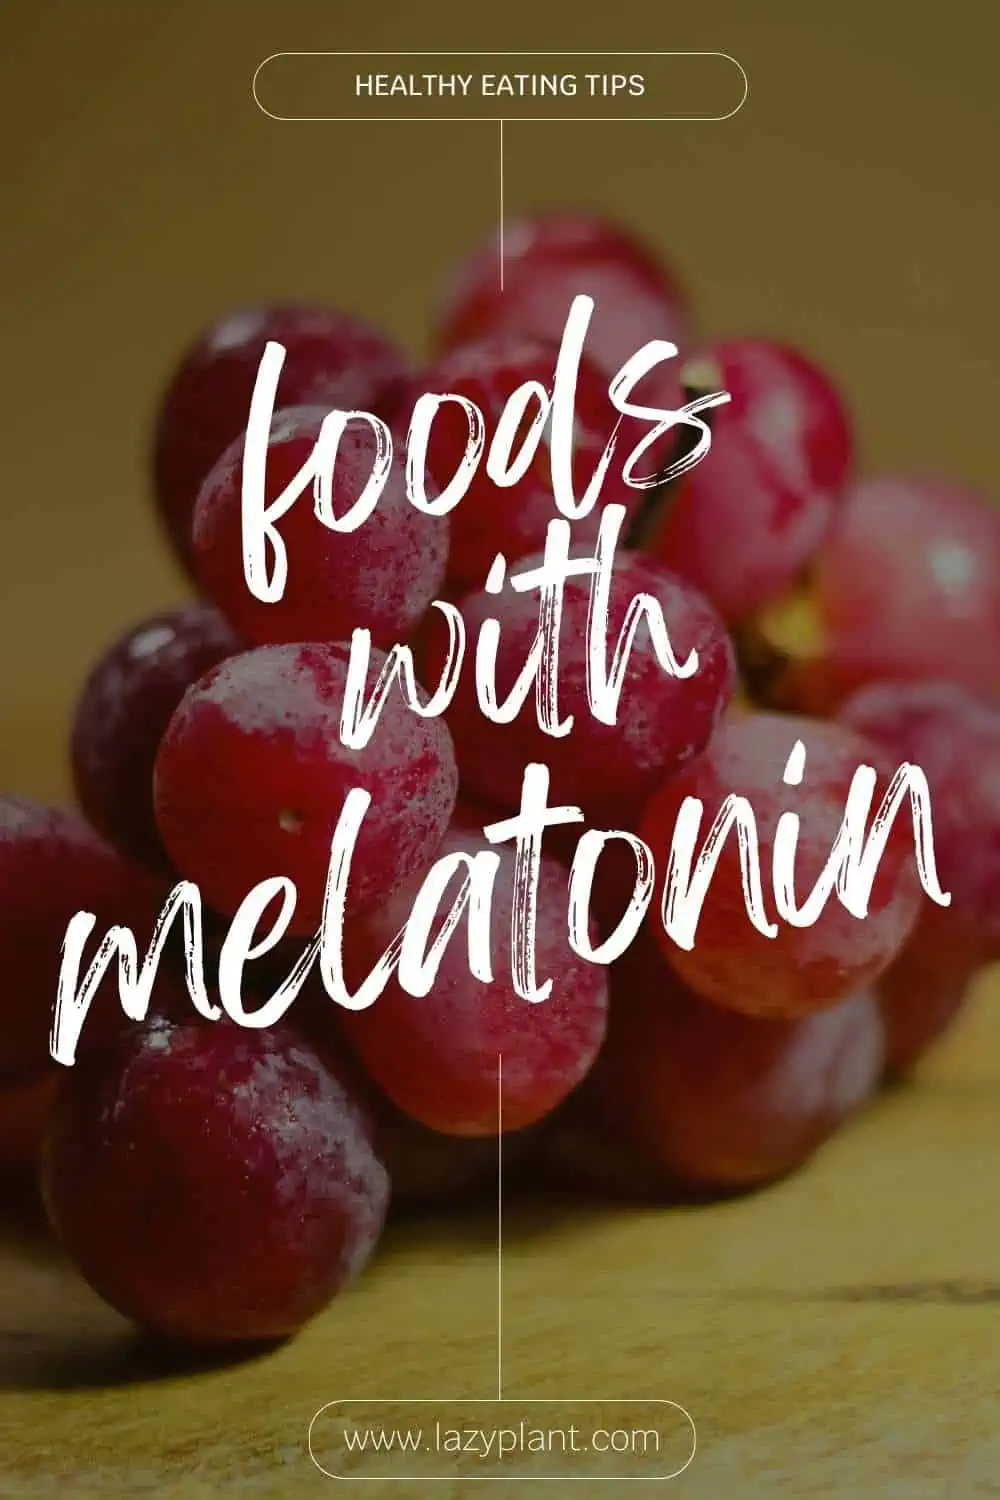 Can I get high amounts of melatonin from food?